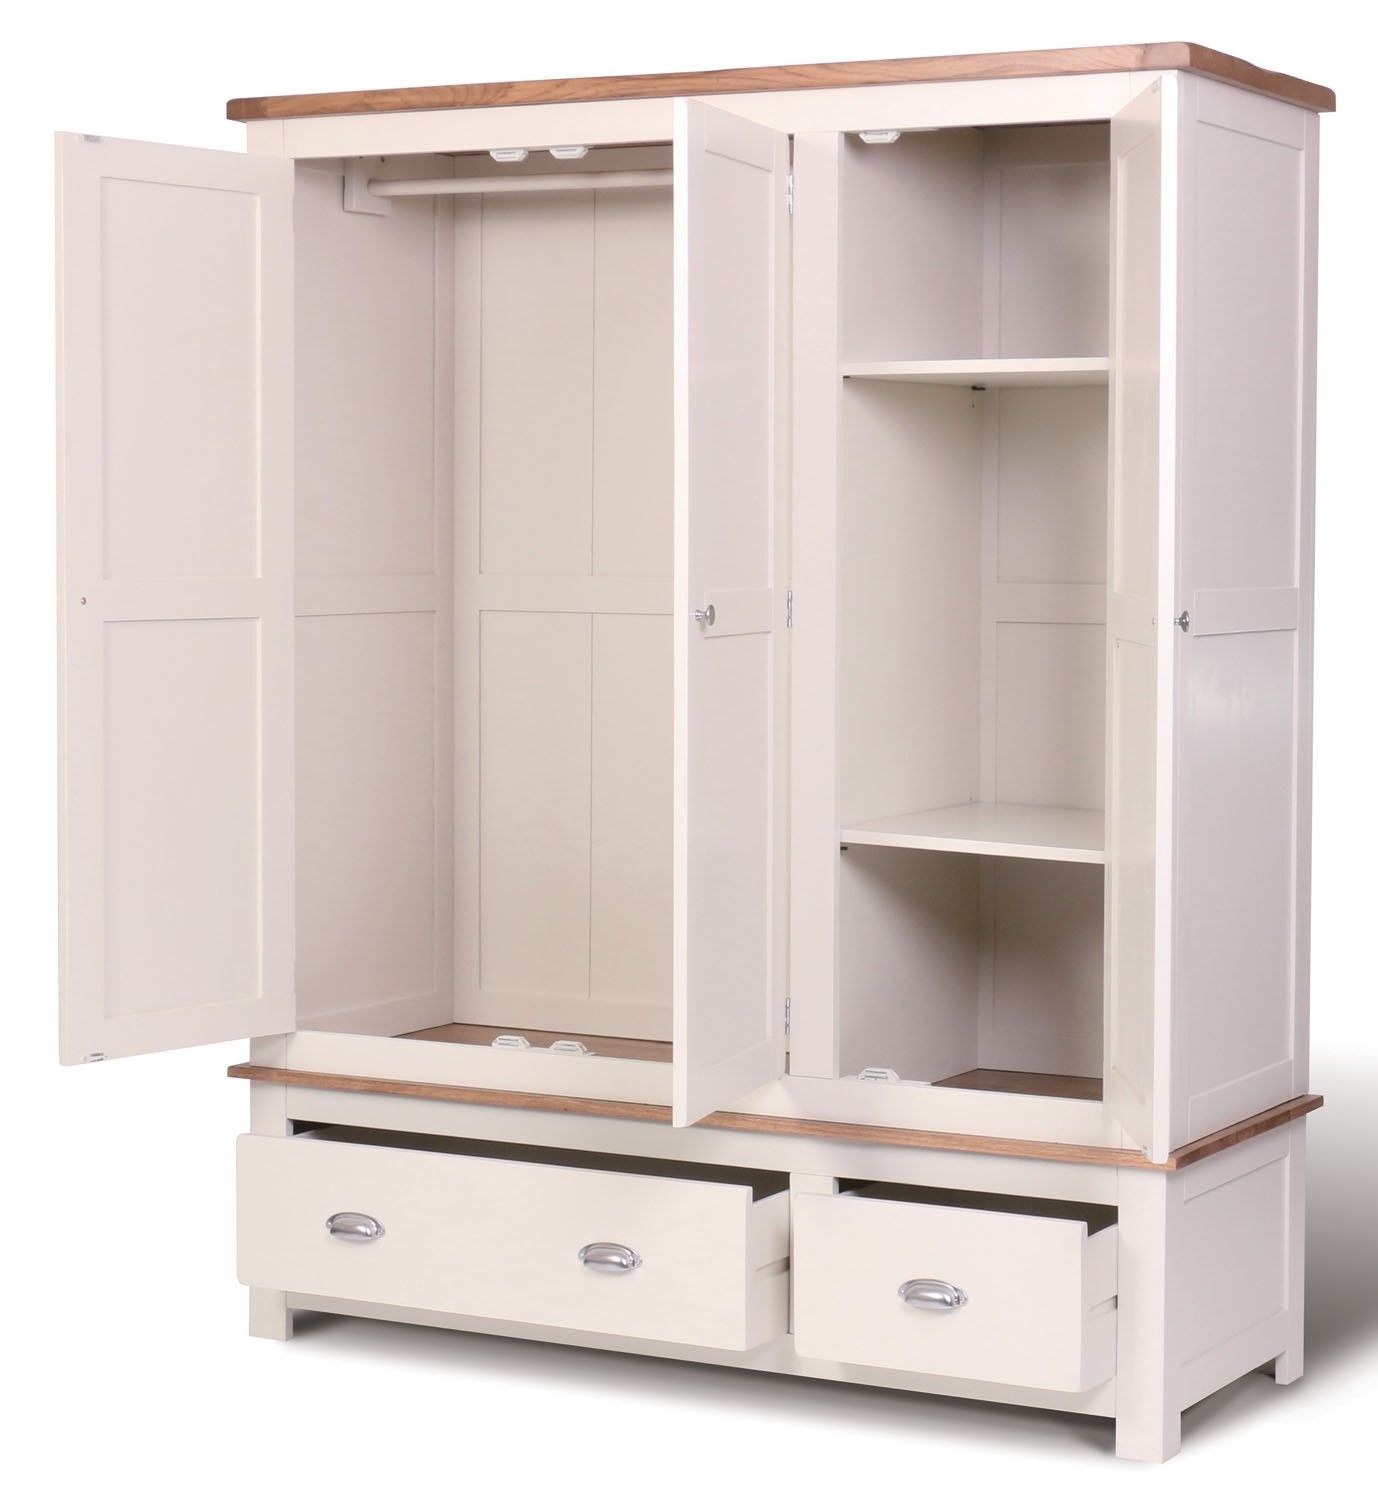 Ascot Triple Wardrobe With Drawers Wardrobes Bedroom Hallowood In Wardrobes With Drawers And Shelves (View 12 of 15)